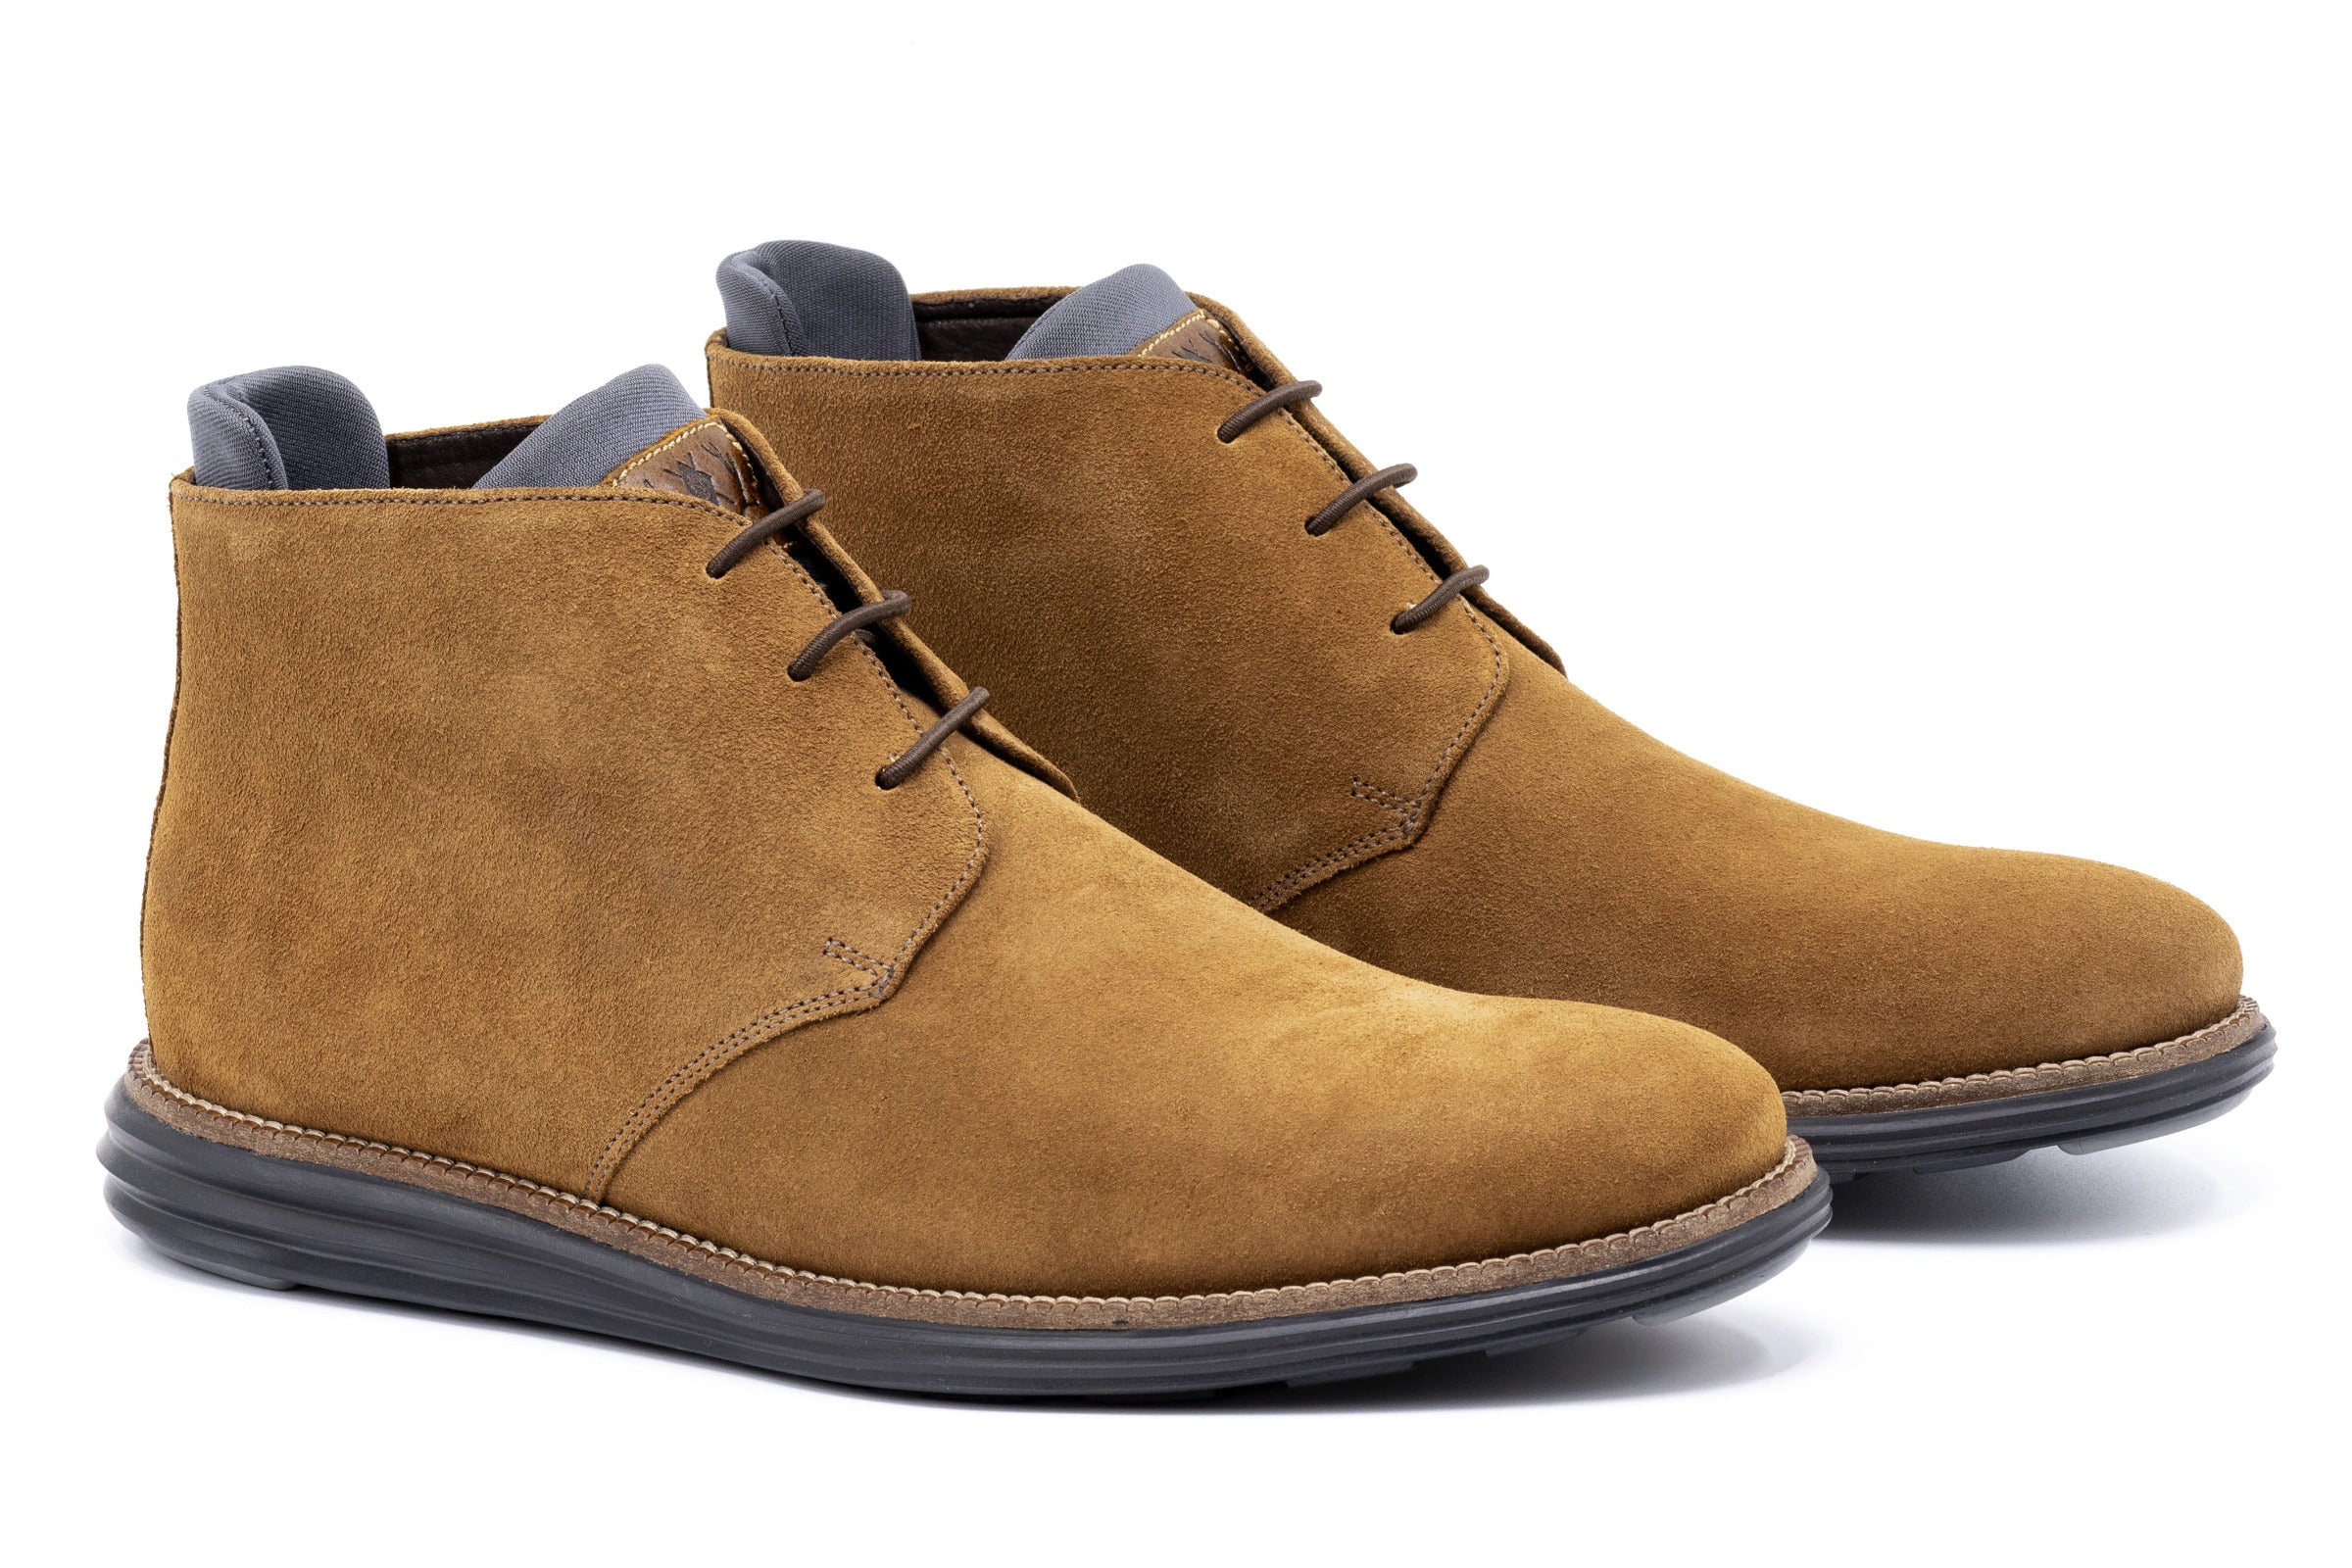 Countryaire Water Repellent Suede Leather Chukka Boots - French Roast